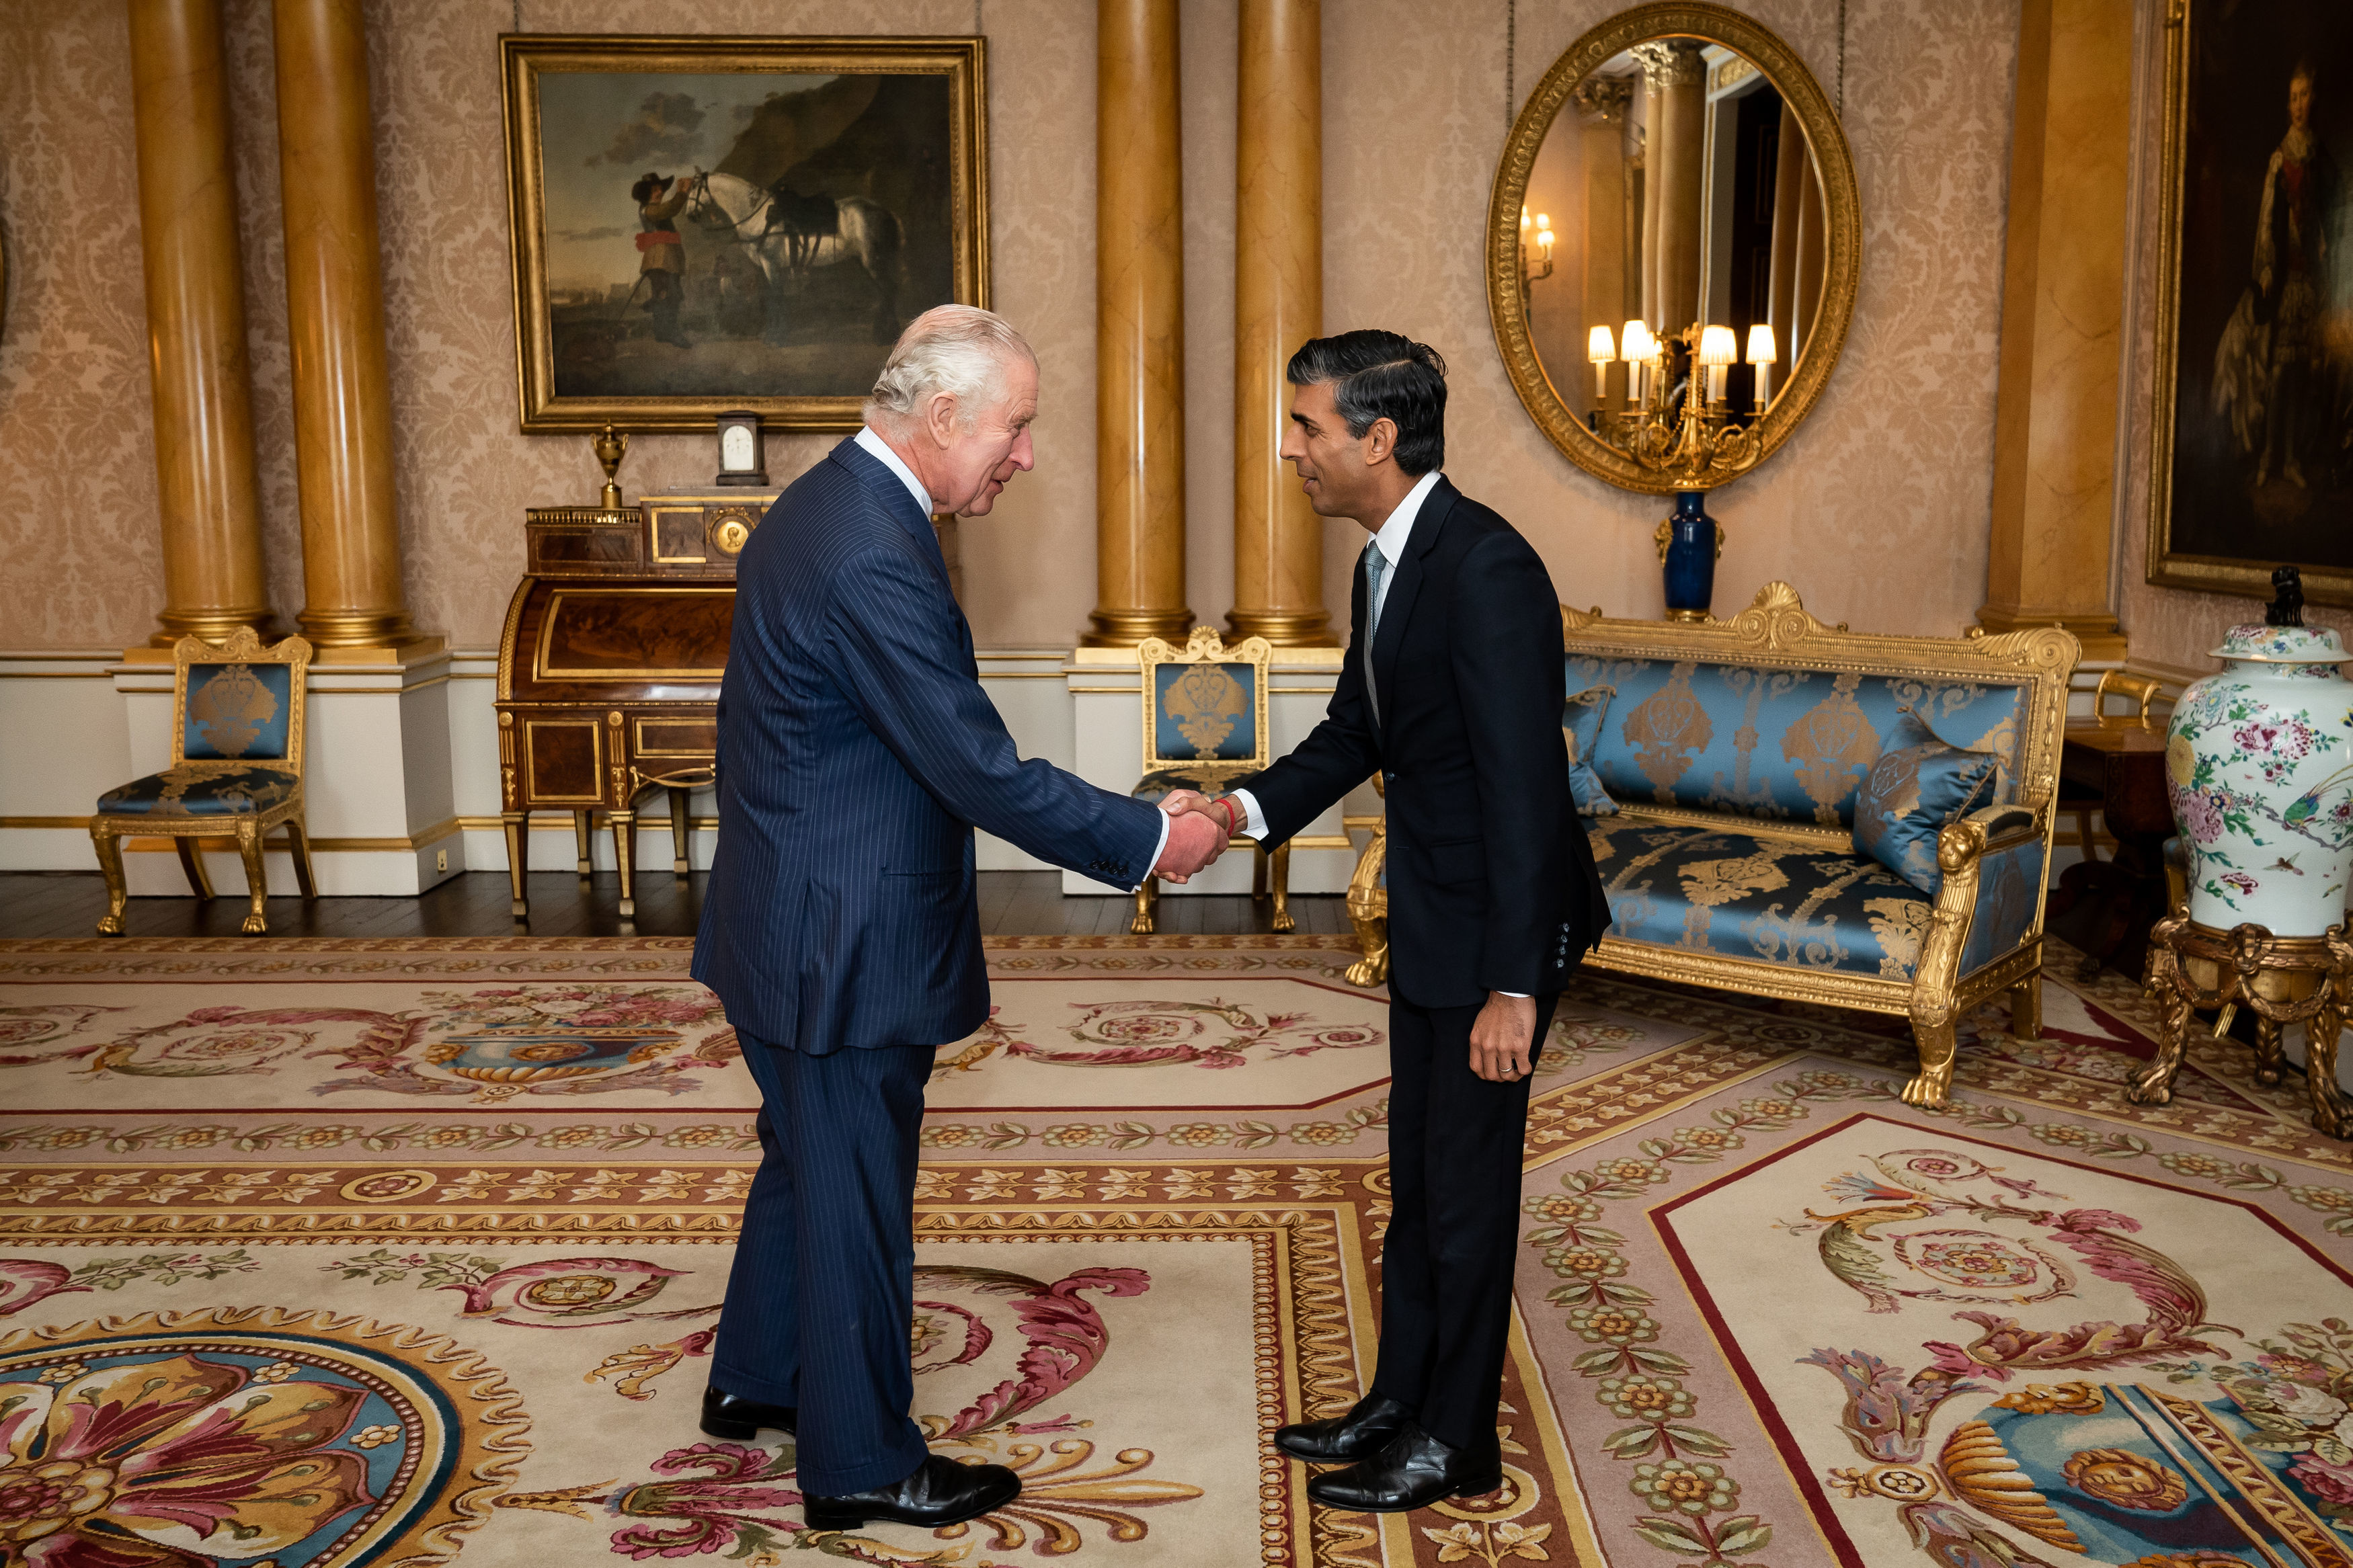 <p>King Charles III welcomed Rishi Sunak during an audience at Buckingham Palace in London where he invited the newly elected leader of the Conservative Party to become prime minister and form a new government on Oct. 25, 2022. Rishi is Britain's first ever prime minister of color as well as the first PM to start his tenure as the country's leader under the new king.</p>